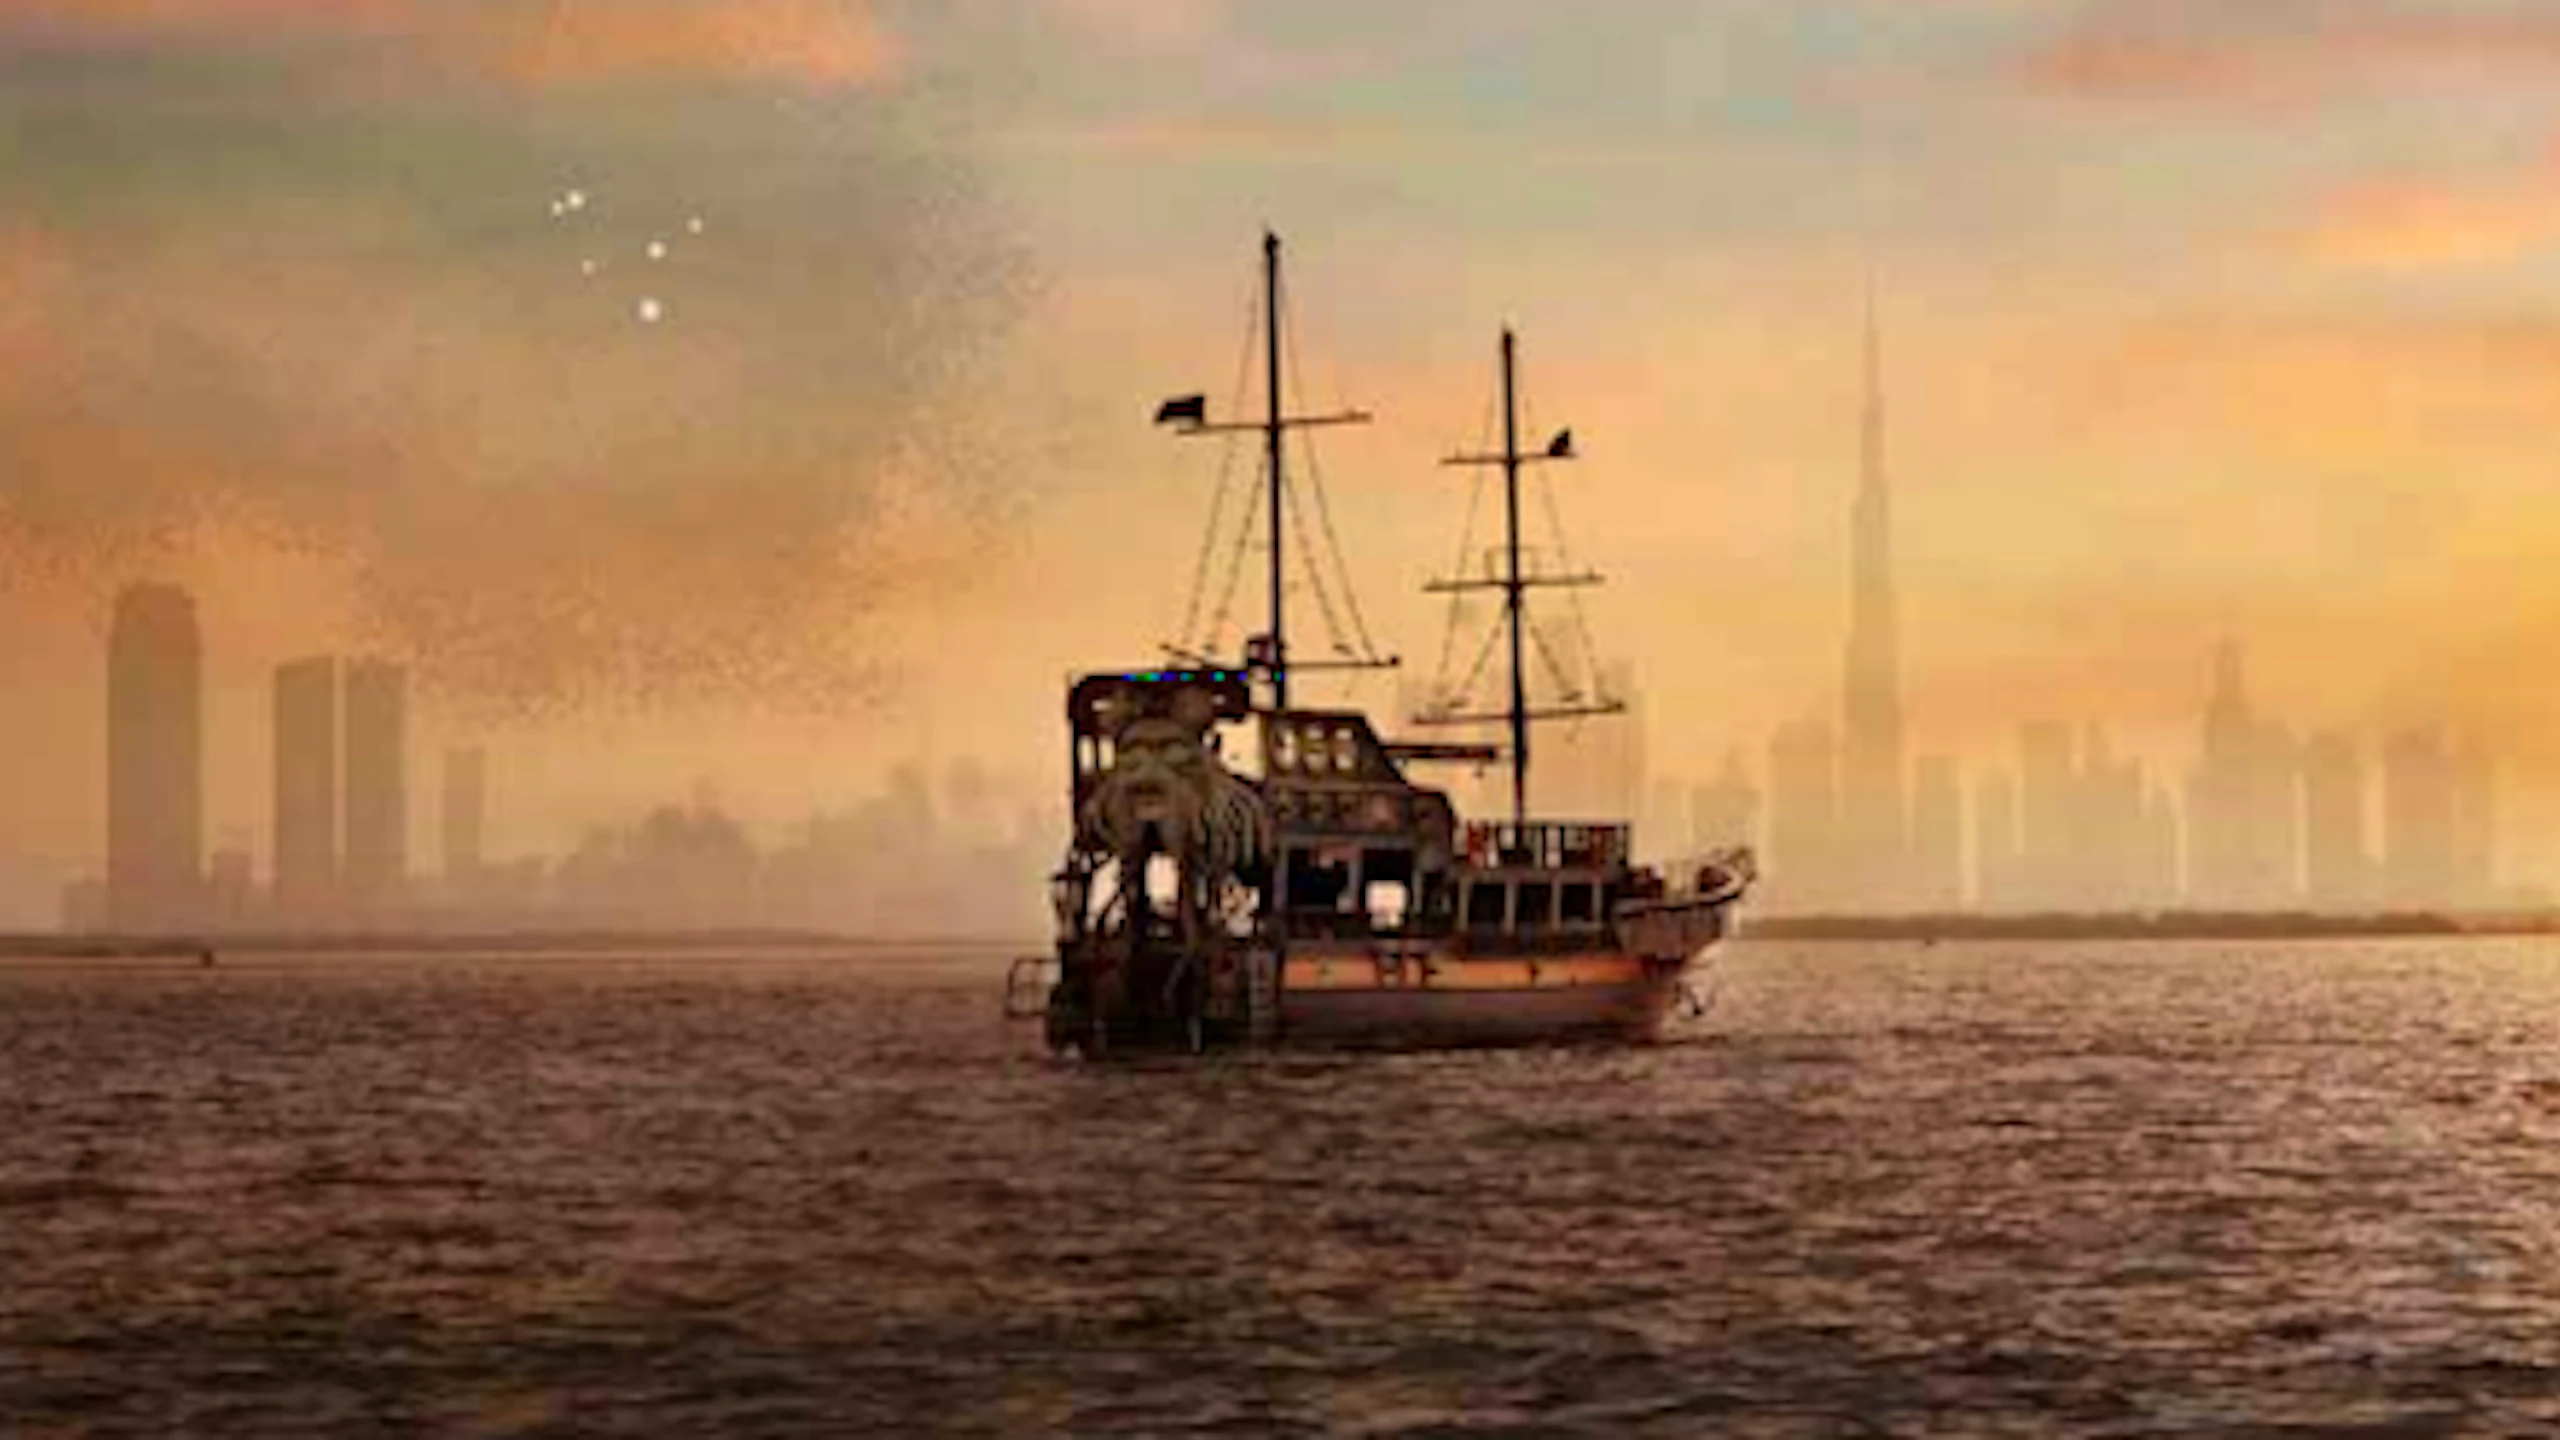 Black Pearl Themed Sightseeing Cruise Ticket